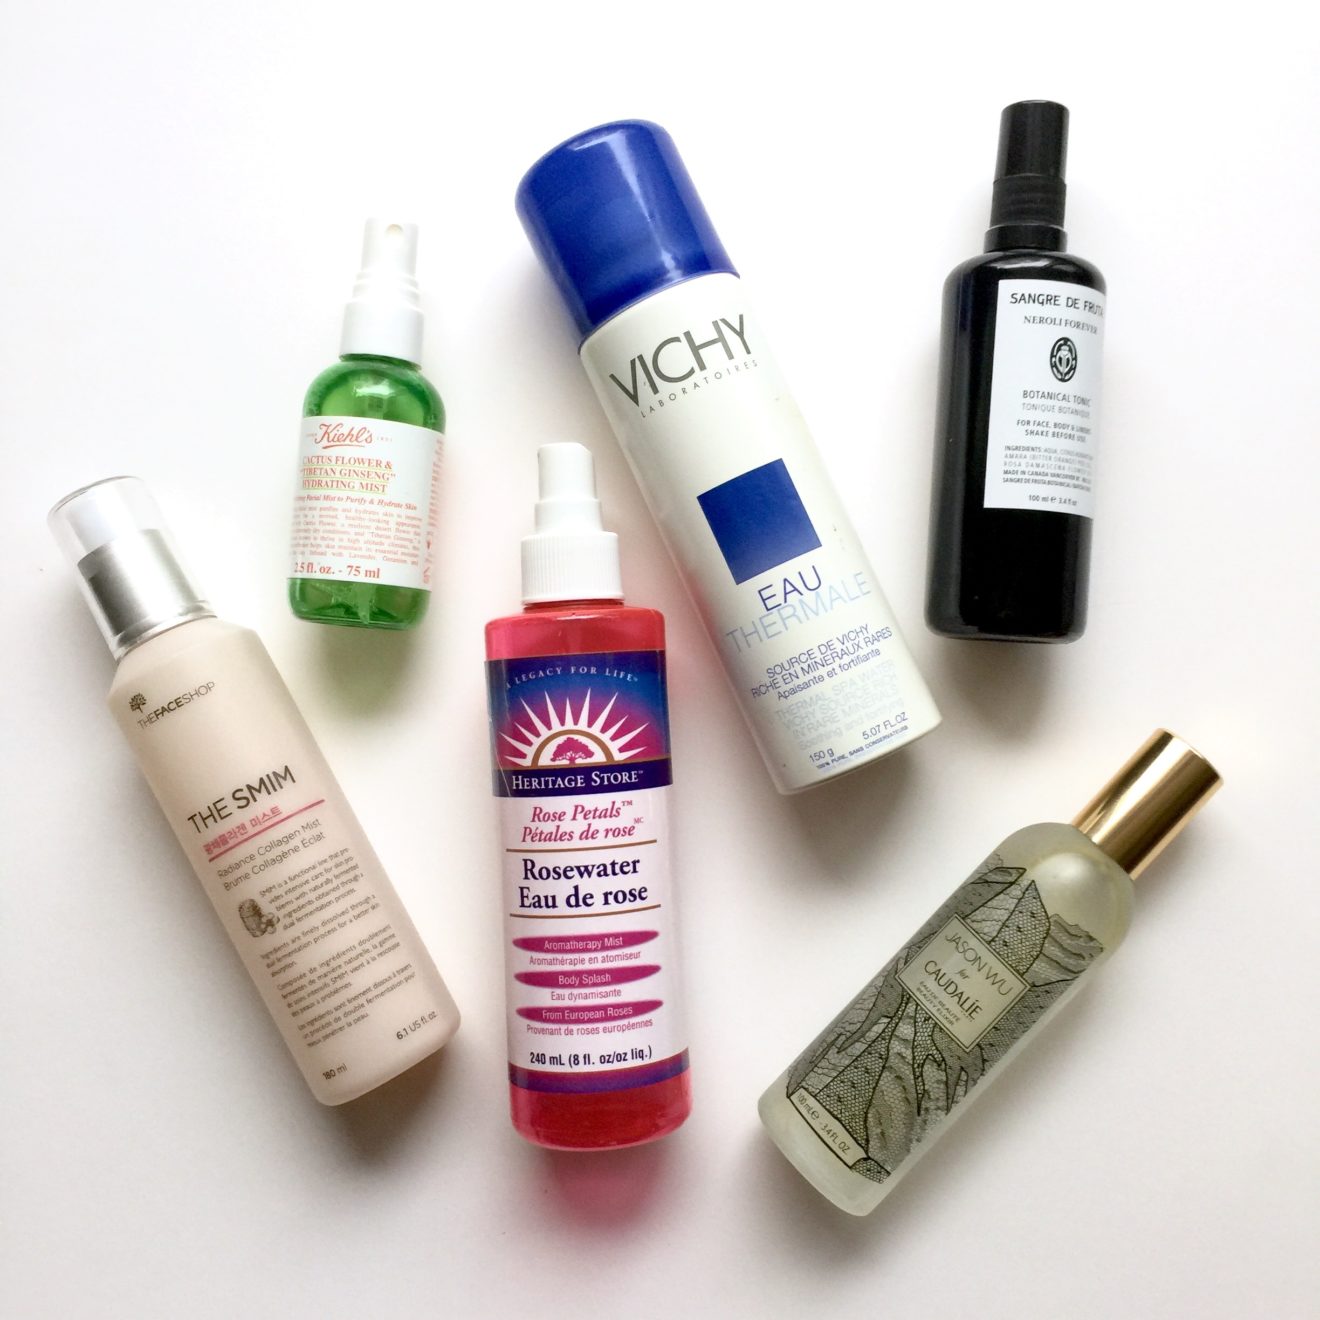 6 Things I Spray On My Face For A Dewy Glow